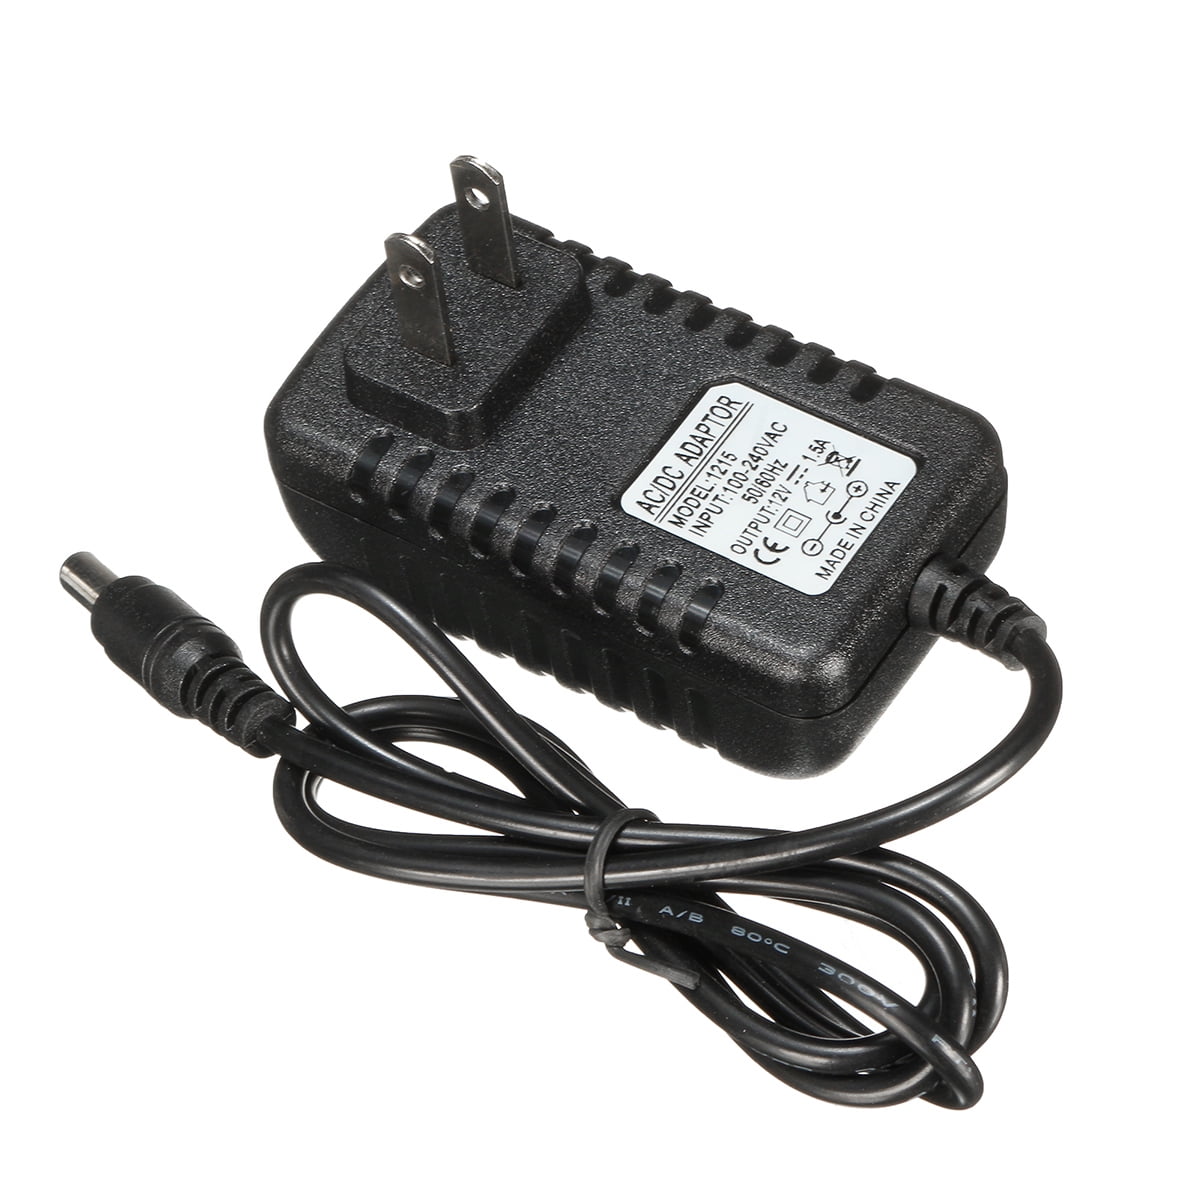 AC/DC Adapter 12V 1A Battery Wall Charger For  Kids ATV Quad Ride On Cars New 